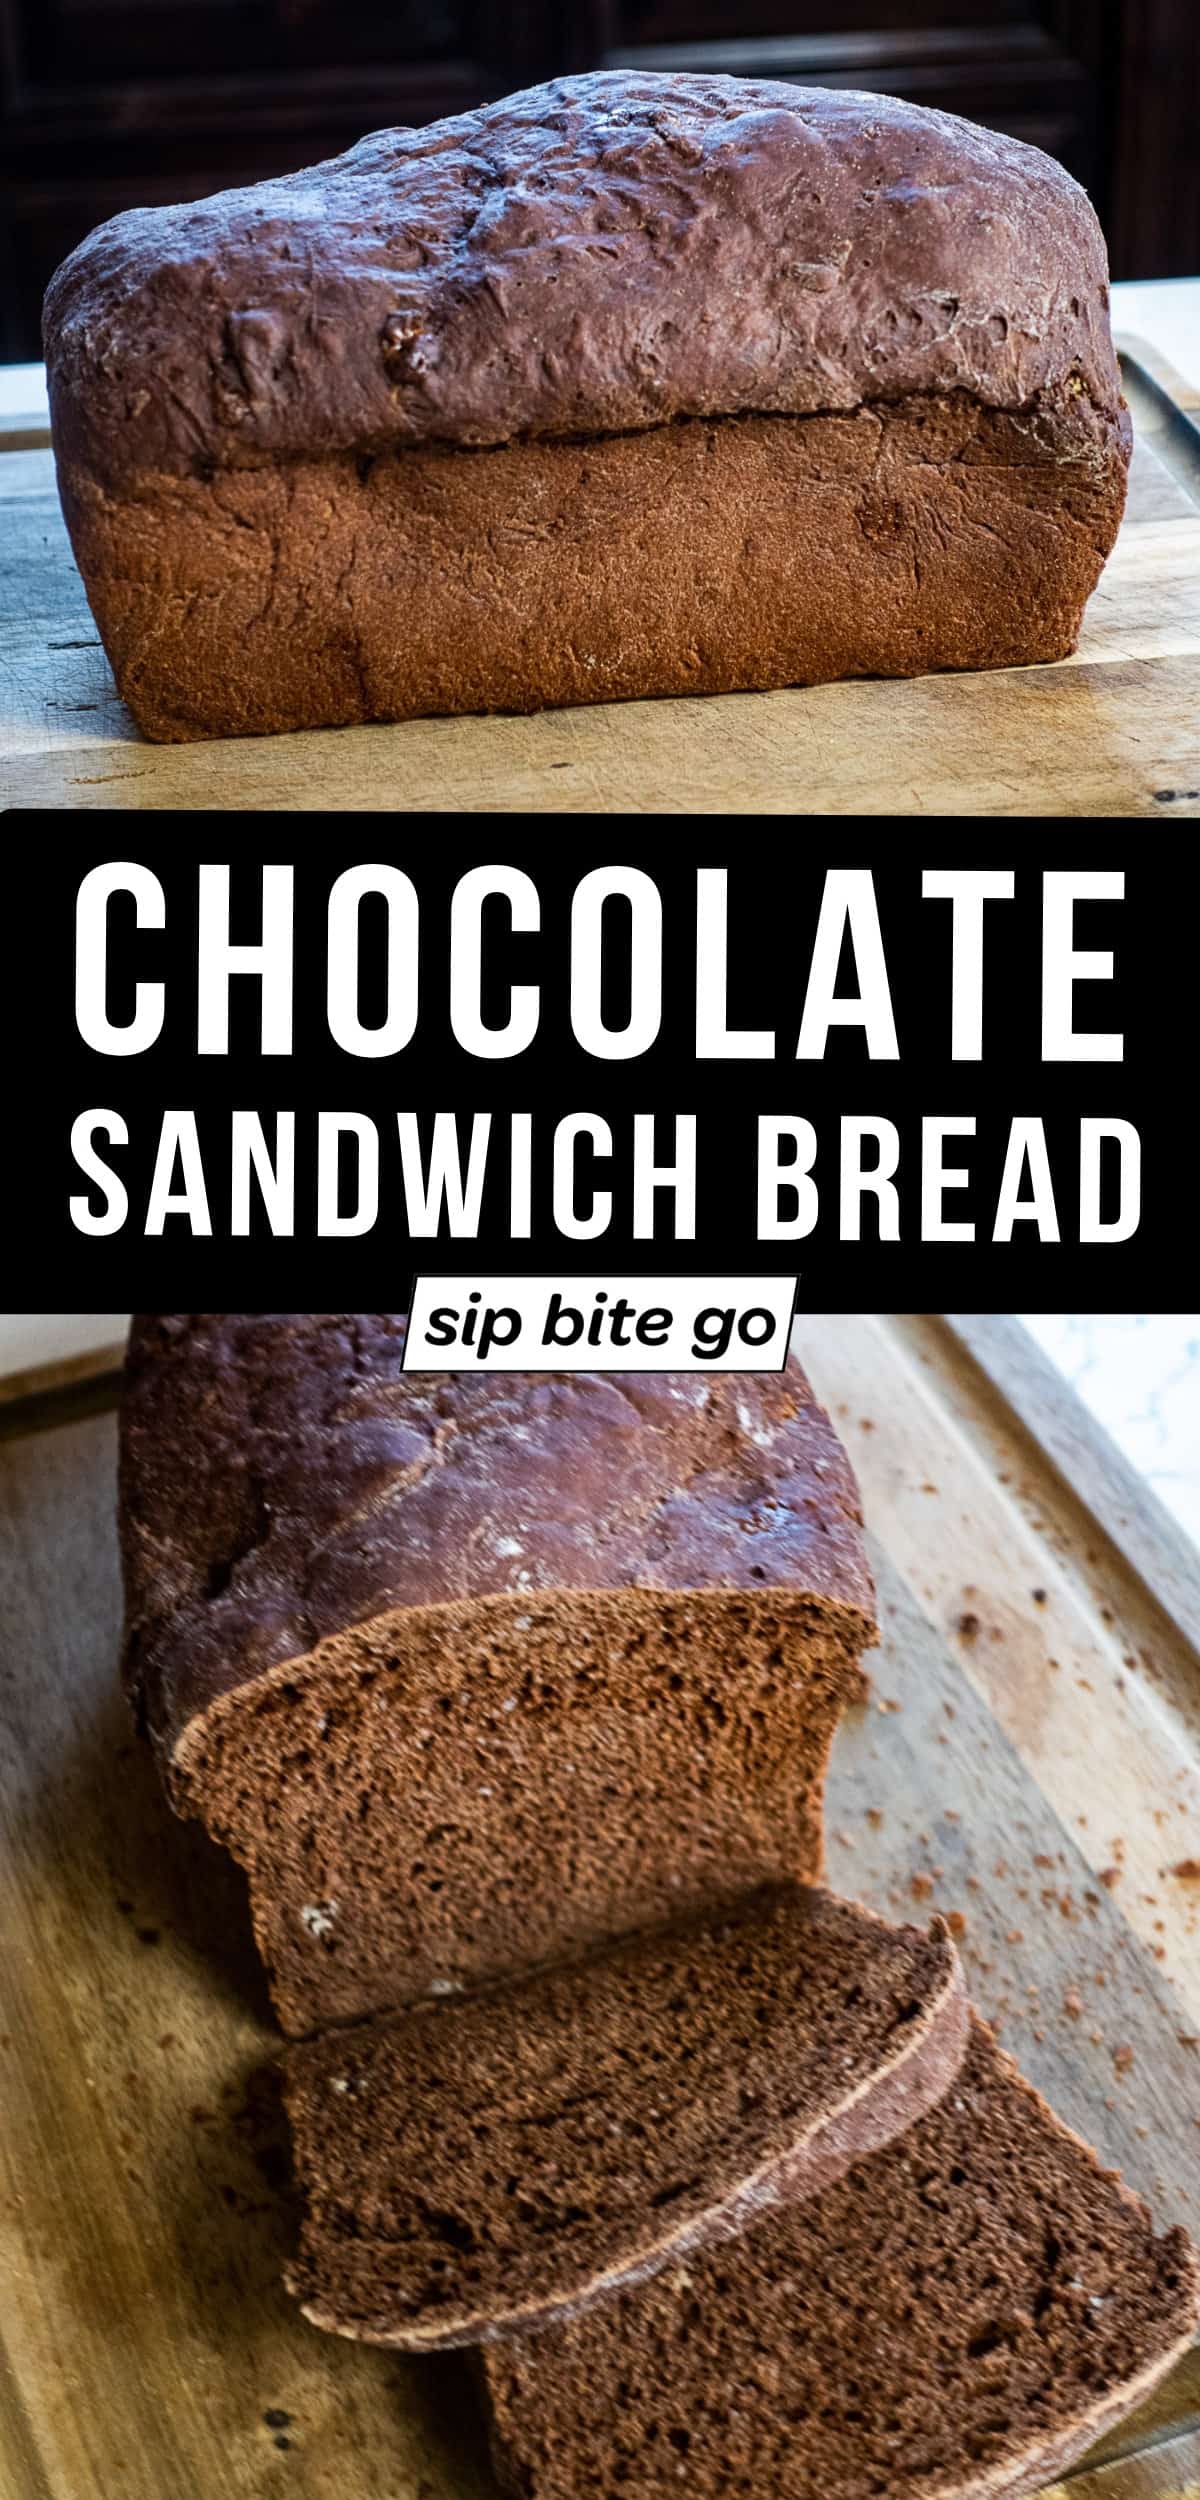 Chocolate Yeast Bread Recipe with photos of sliced sandwich loaf and text overlay